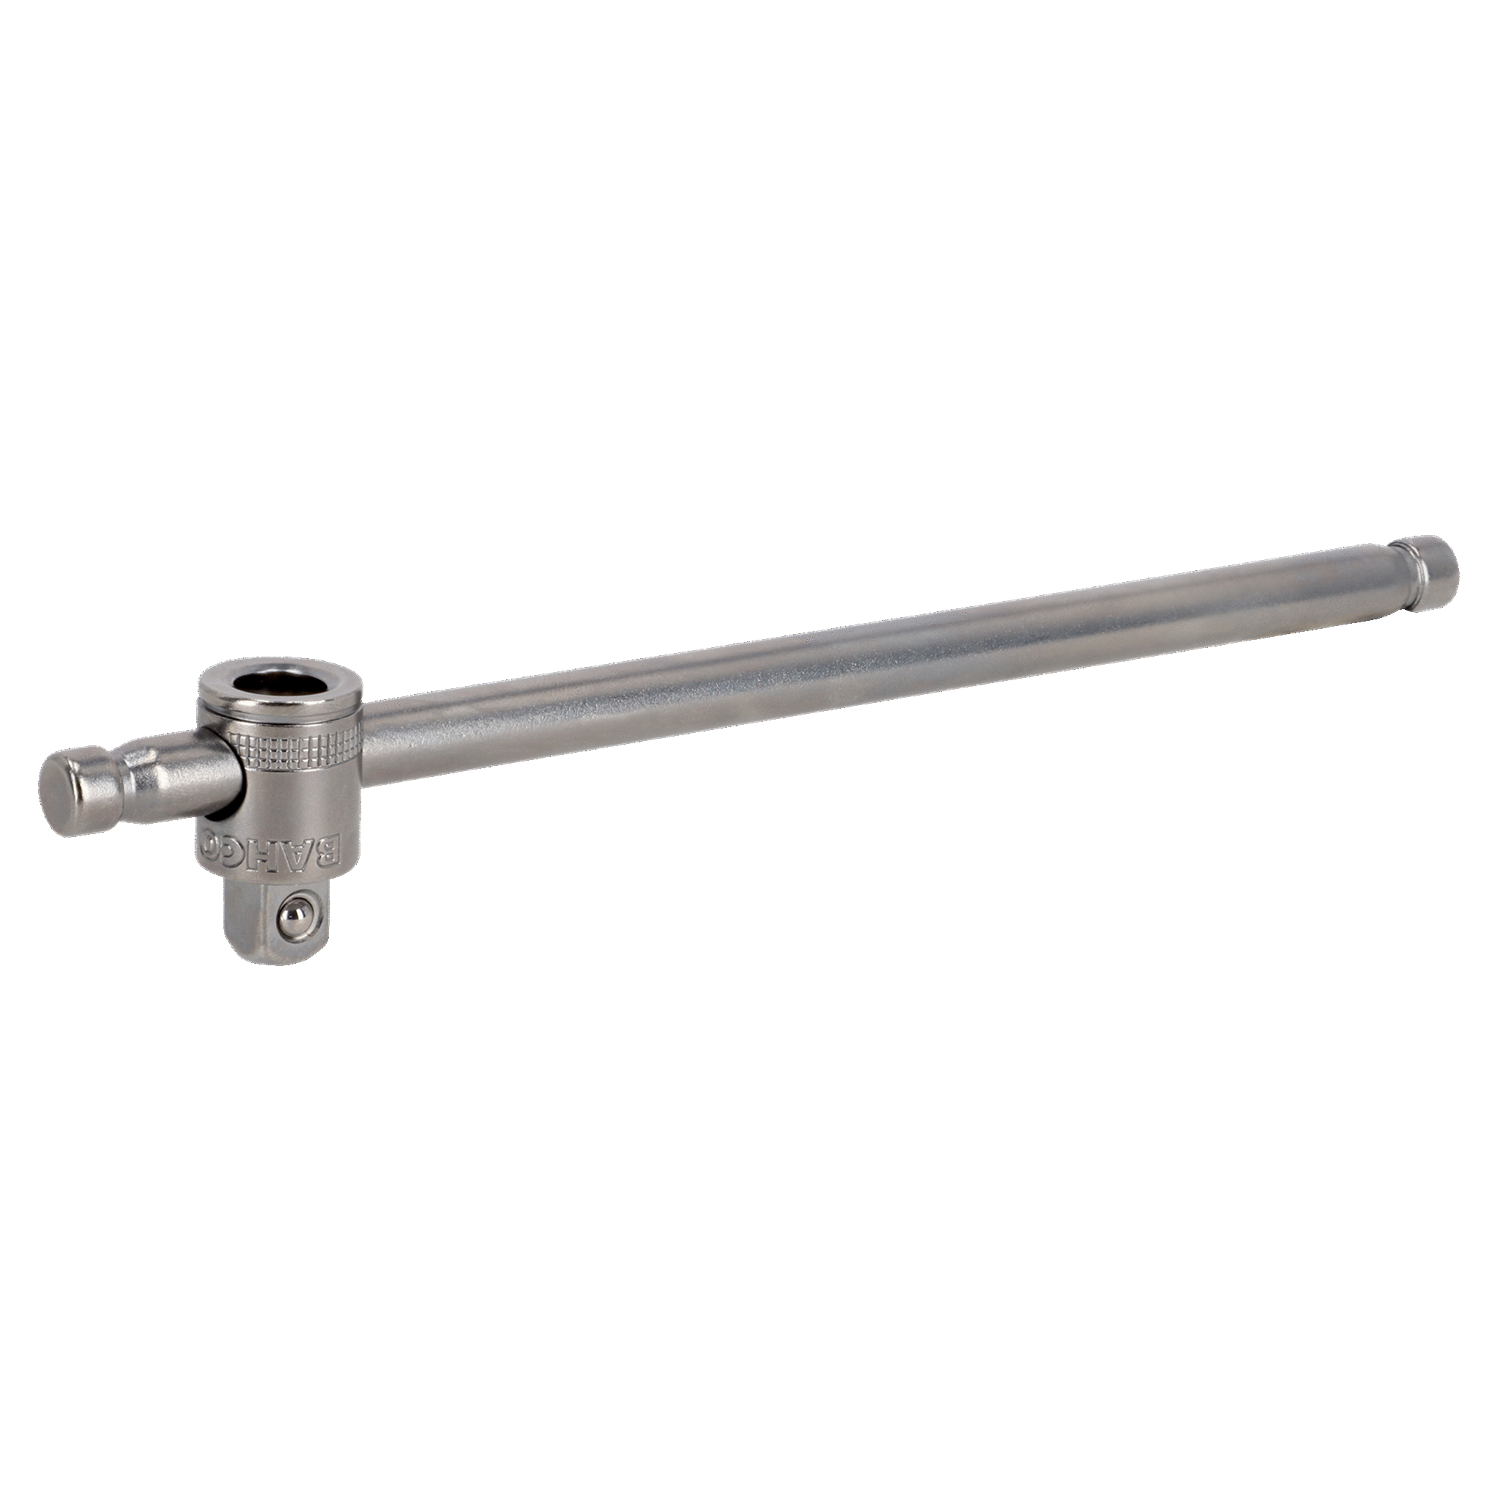 BAHCO 7754 3/8" Square Drive Sliding T-handle Deep Speeder Rotary - Premium Square Drive Sliding T-handle from BAHCO - Shop now at Yew Aik.